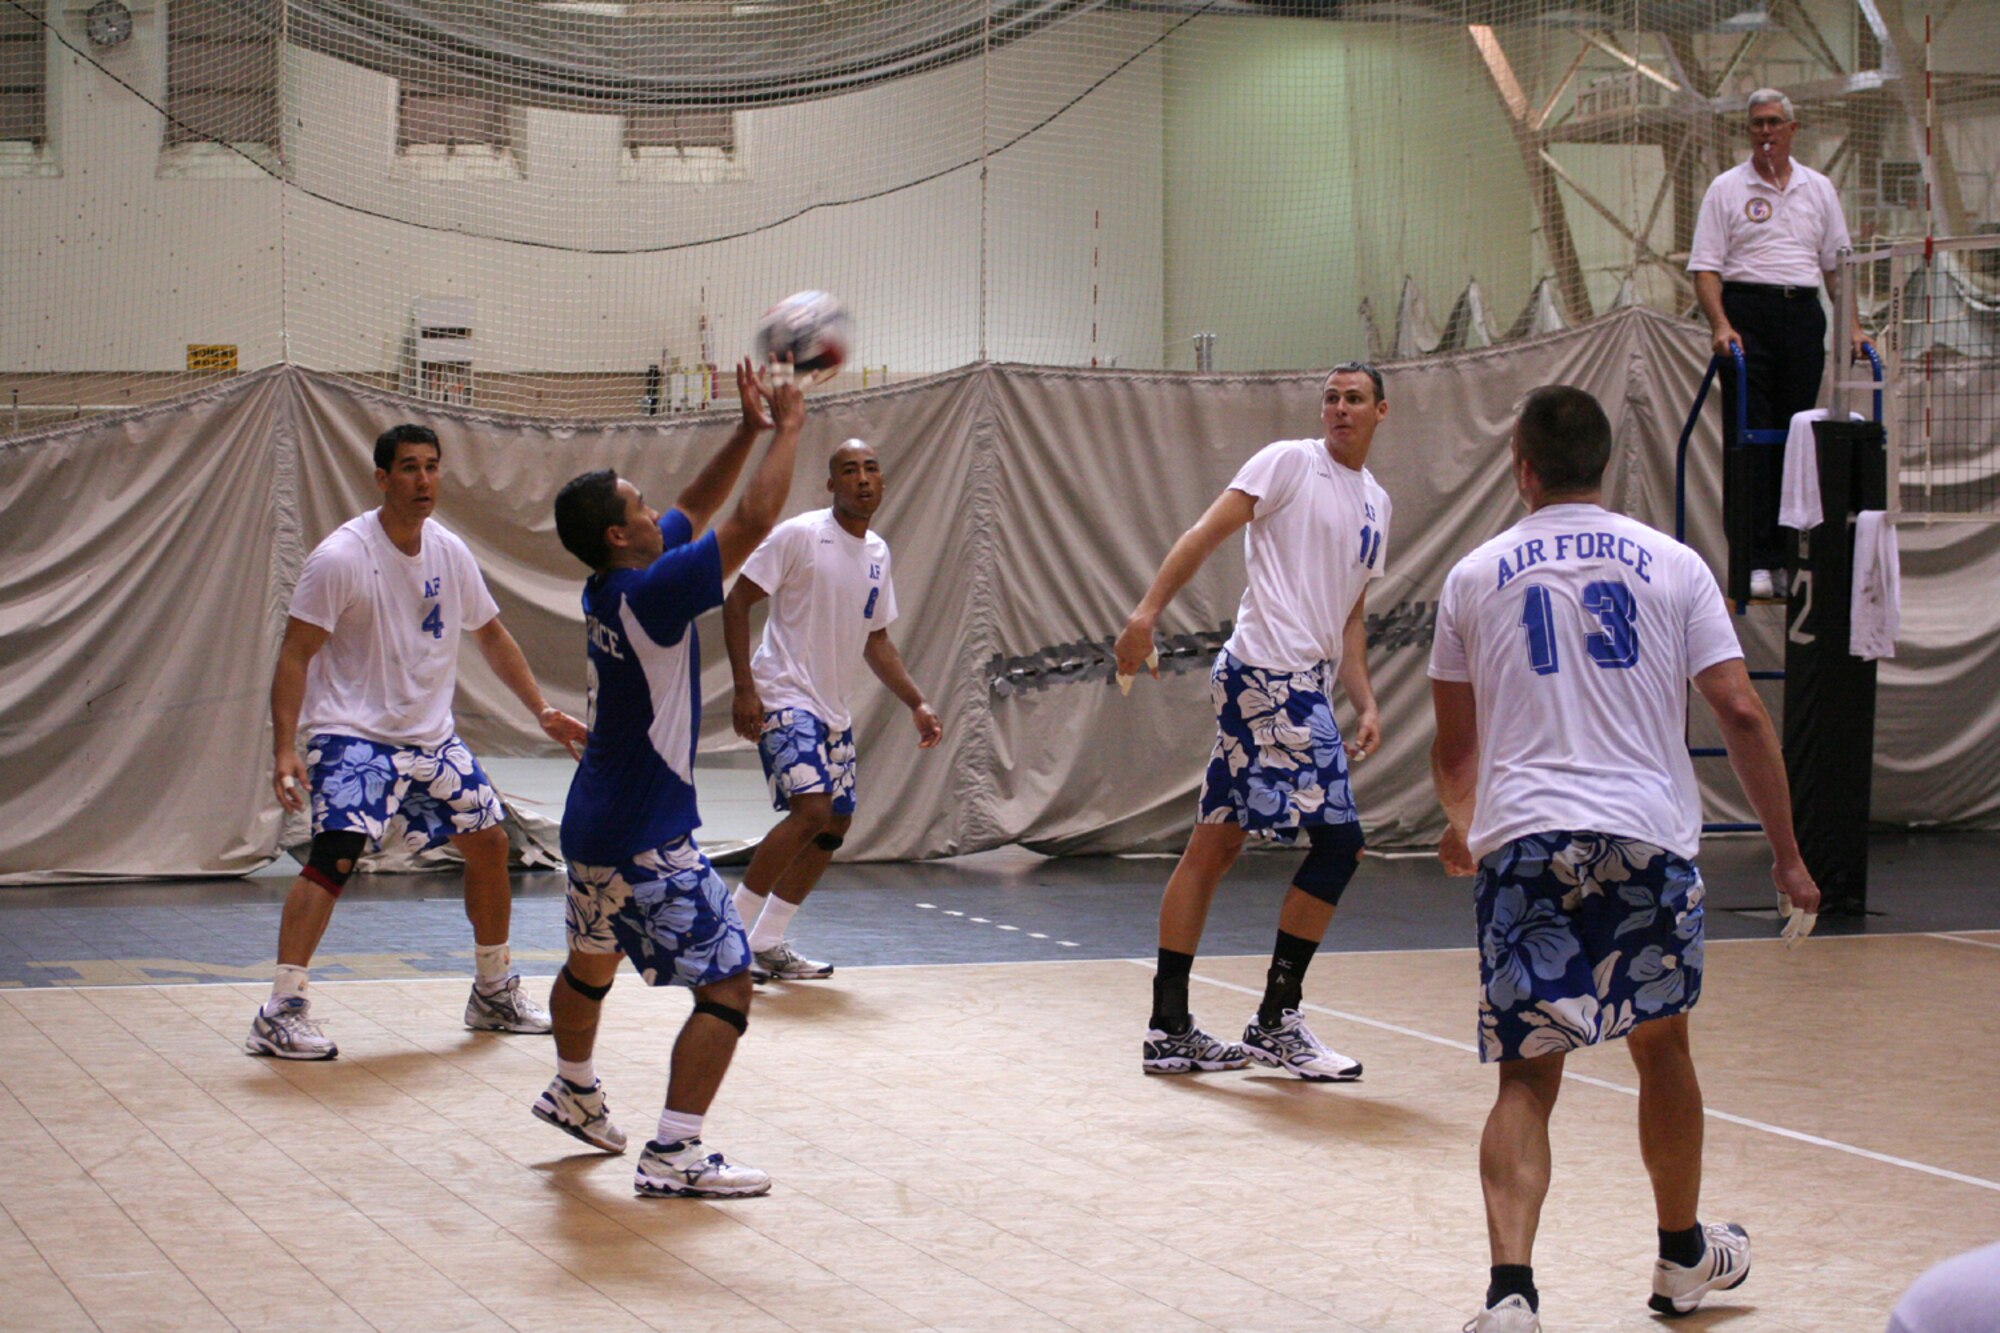 First Lt. Keola Lacar, 508th Aircraft Sustainment Wing, sets a ball during the 2007 Armed Forces Vollyeball Tournament at West Point Military Academy, N.Y. (Courtesy photo)